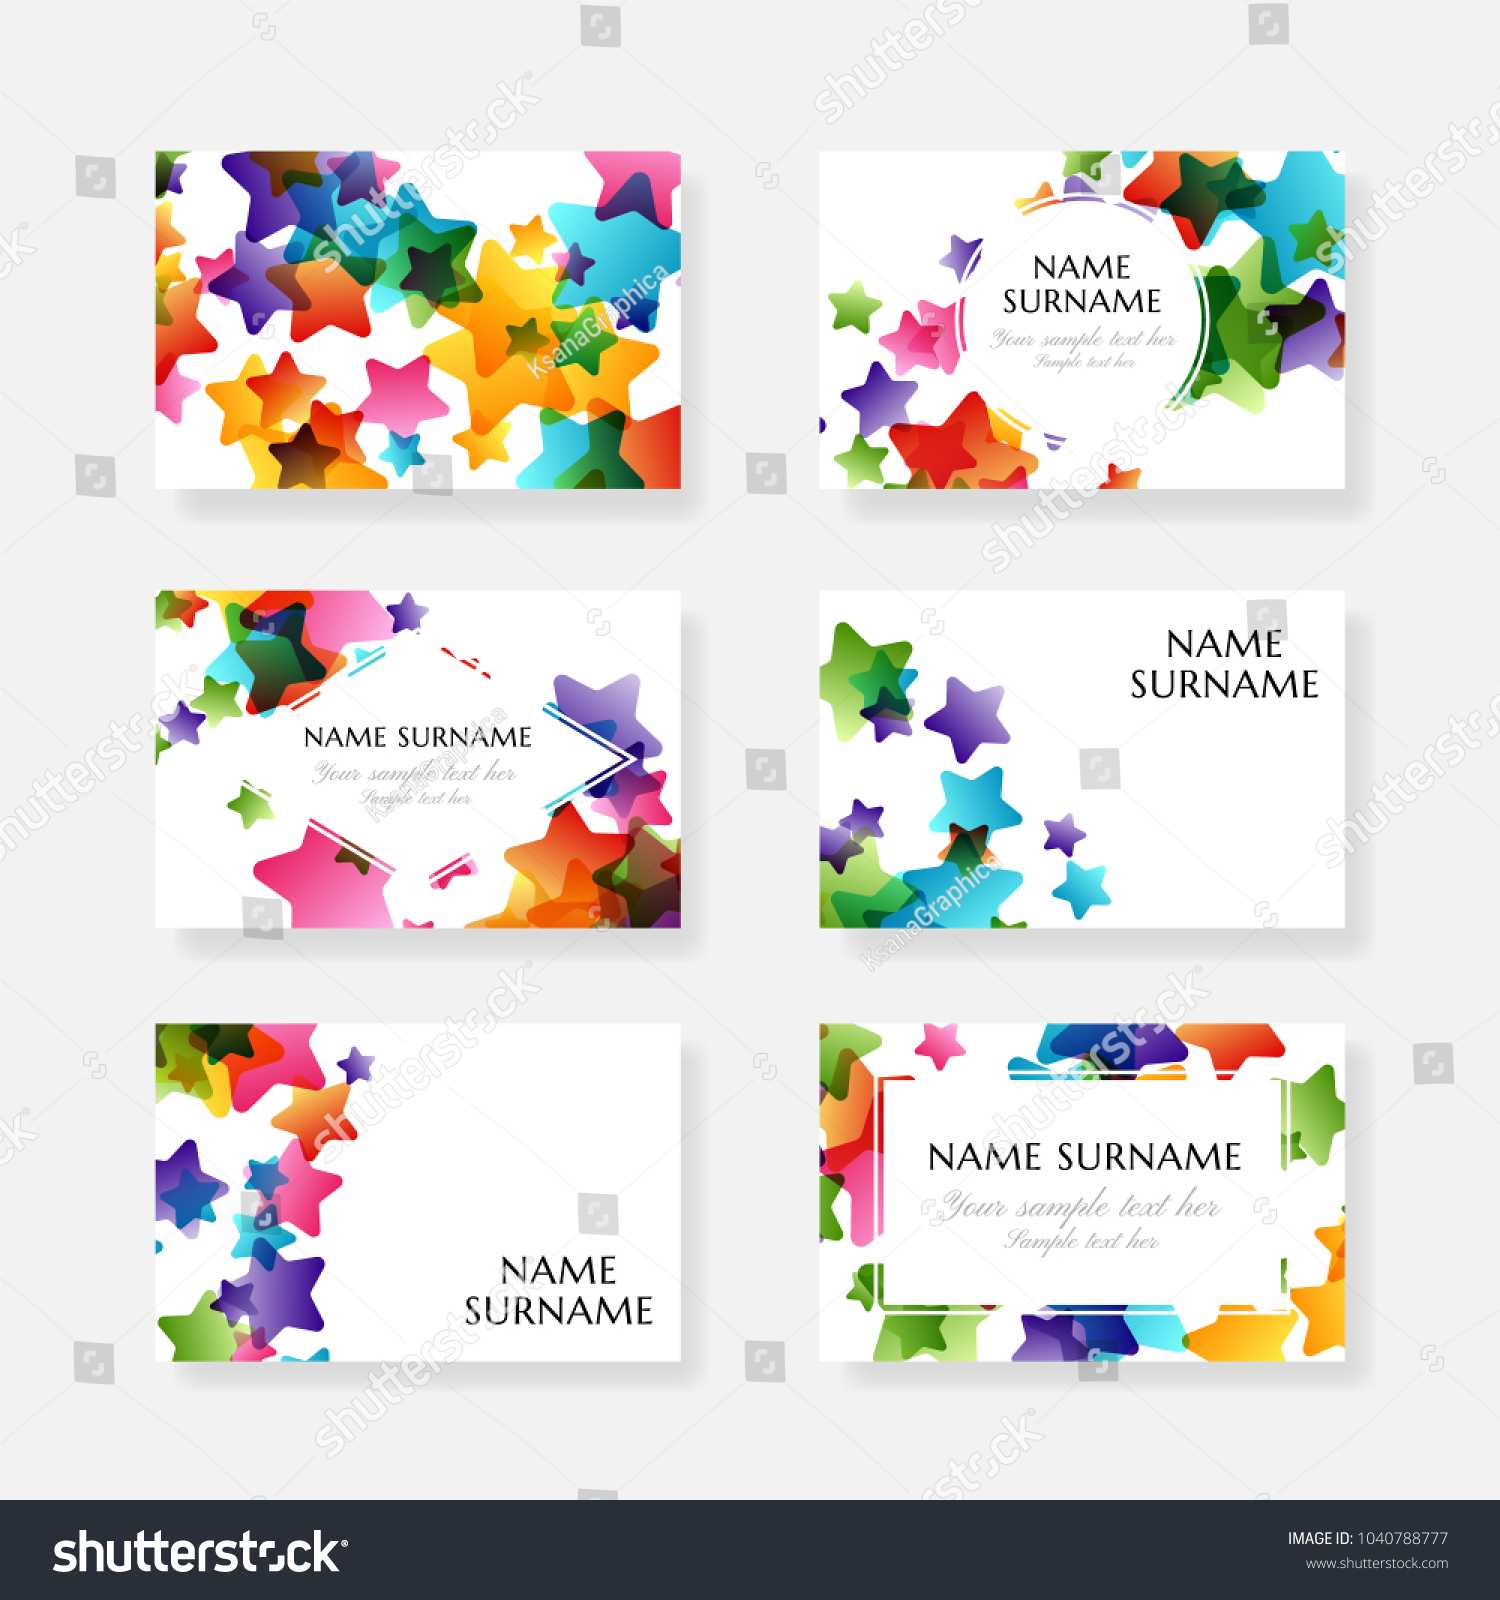 Creative Kids Design Collection Vector Cards Stock Image Inside Id Card Template For Kids